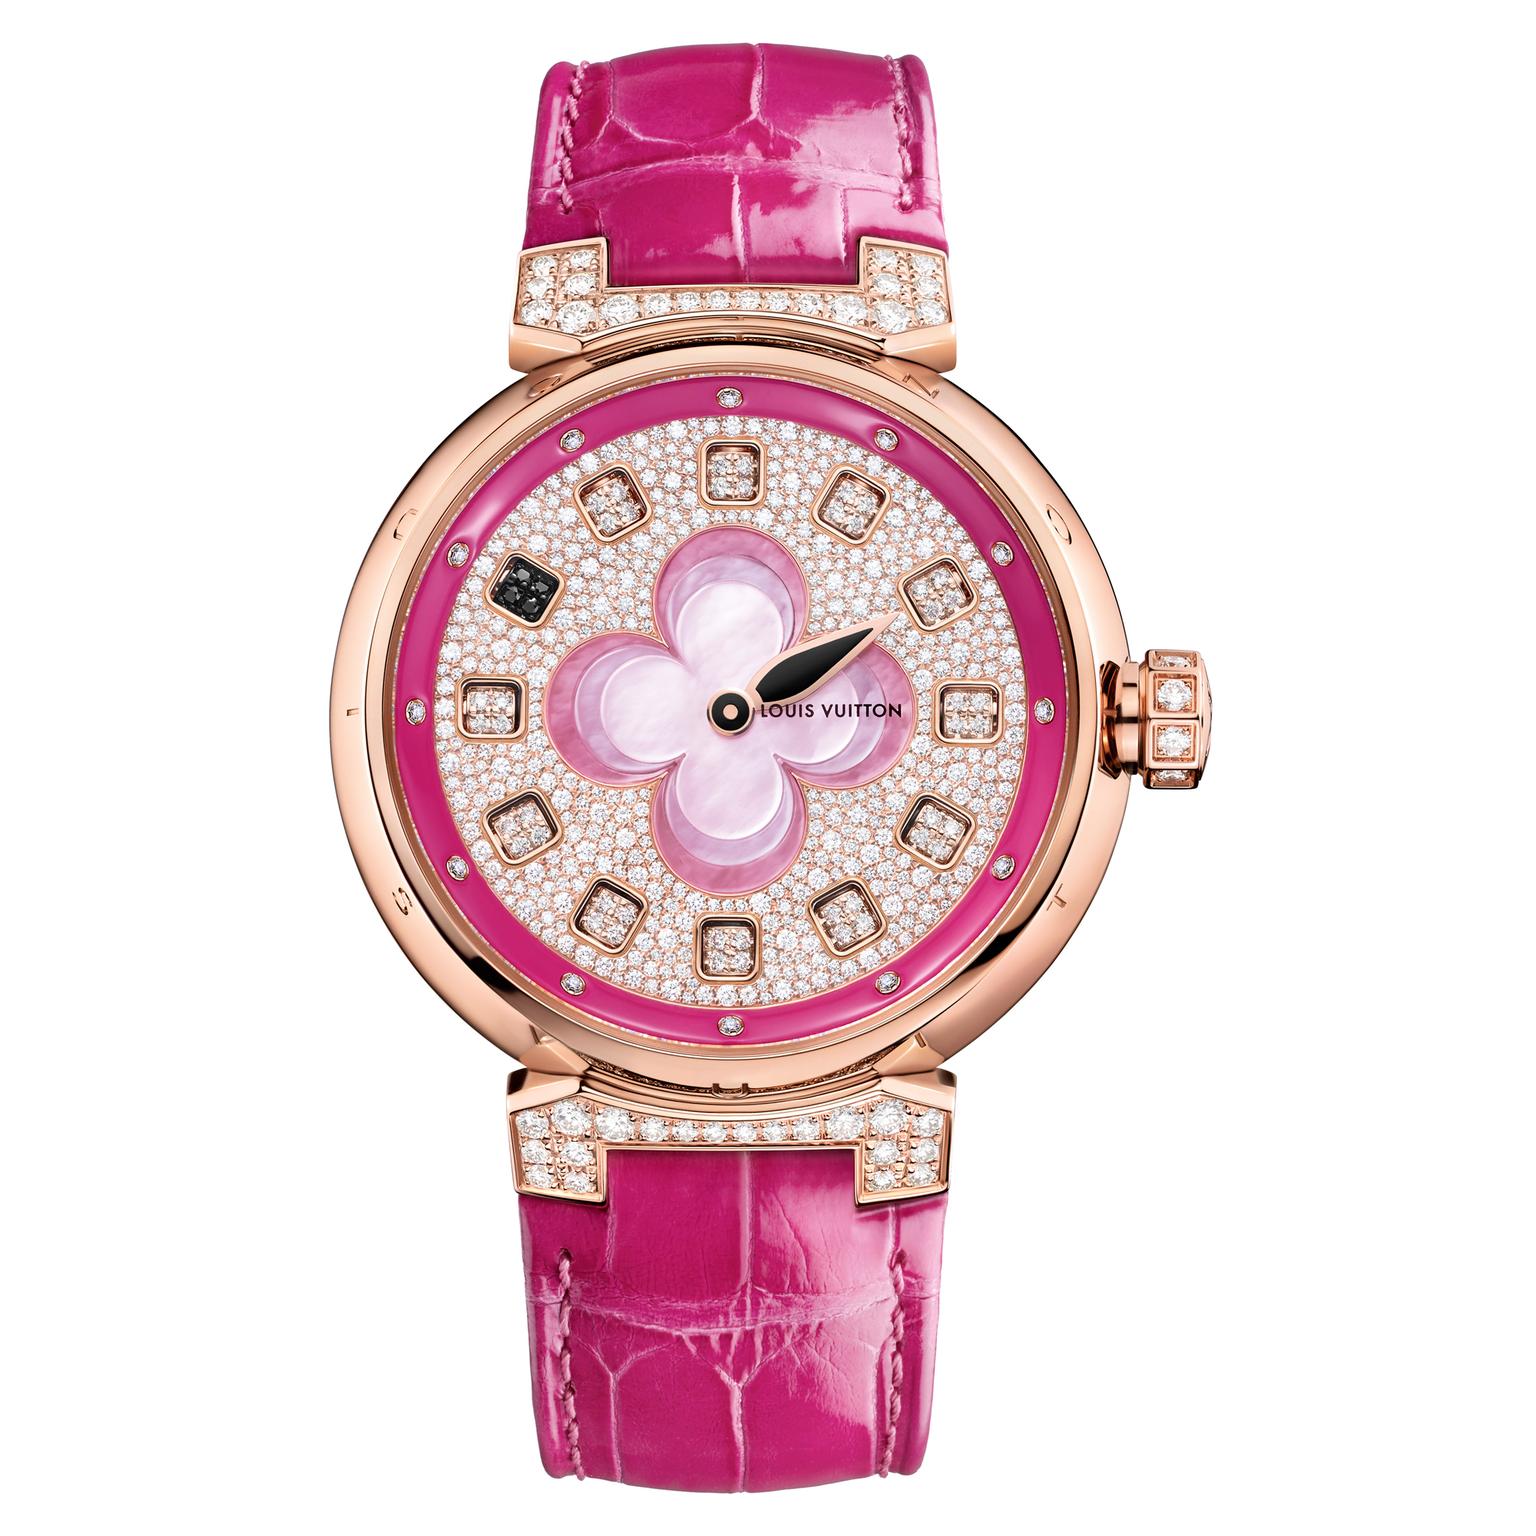 Louis Vuitton Spin Time watch in pink